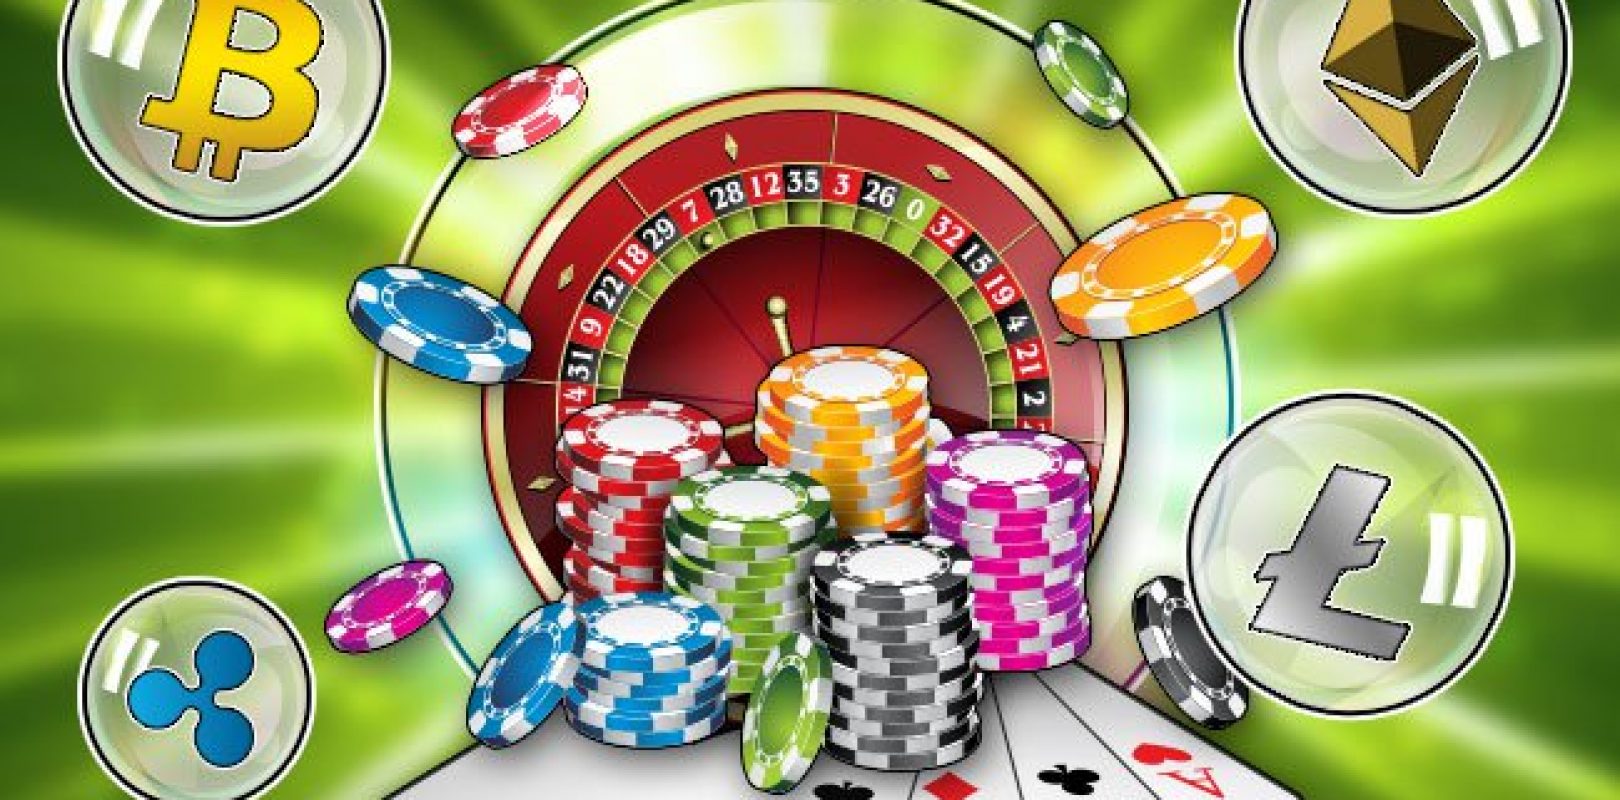 Online casino tips and tricks